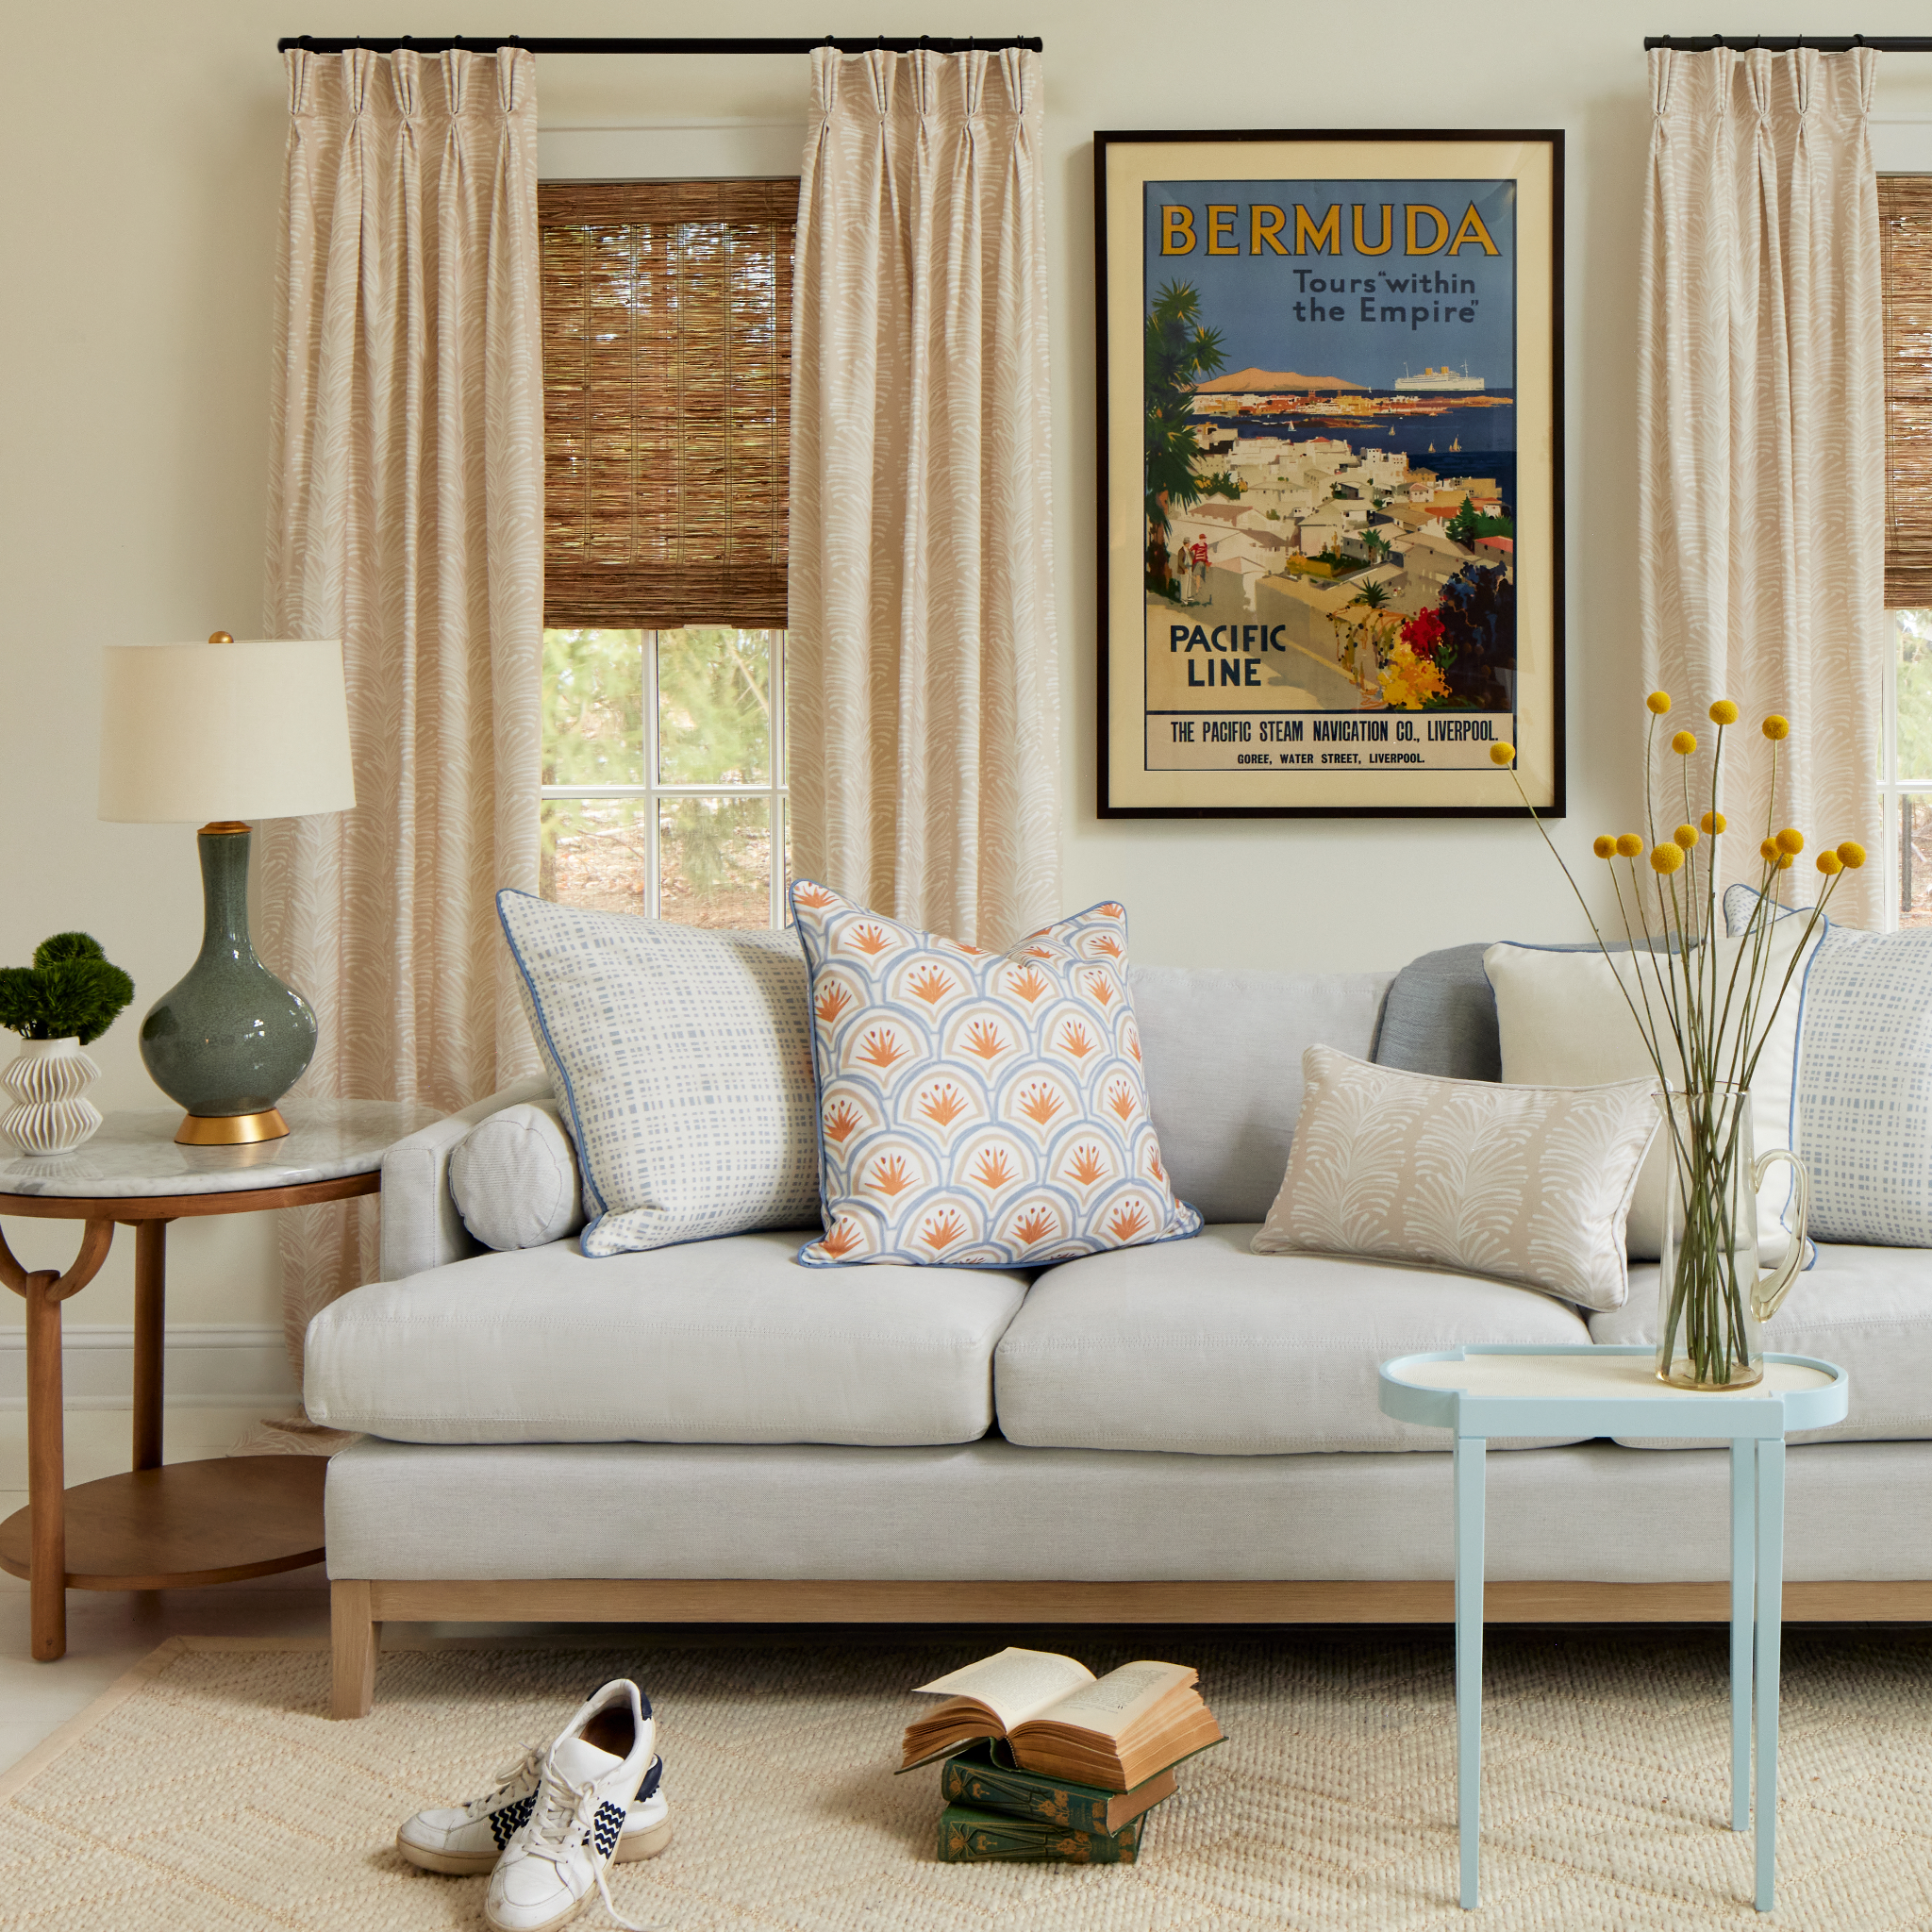 Living room styled with two sky blue gingham printed pillows, Art Deco Palm Pattern Printed Pillow, Beige Botanical Stripe Printed Lumbar, and Light brown Pillow on top of grey couch with Beige Botanical Stripe set of two curtains, books stacked on floor by pair of white tennis shoes and blue and white circular table with yellow flowers in clear vase